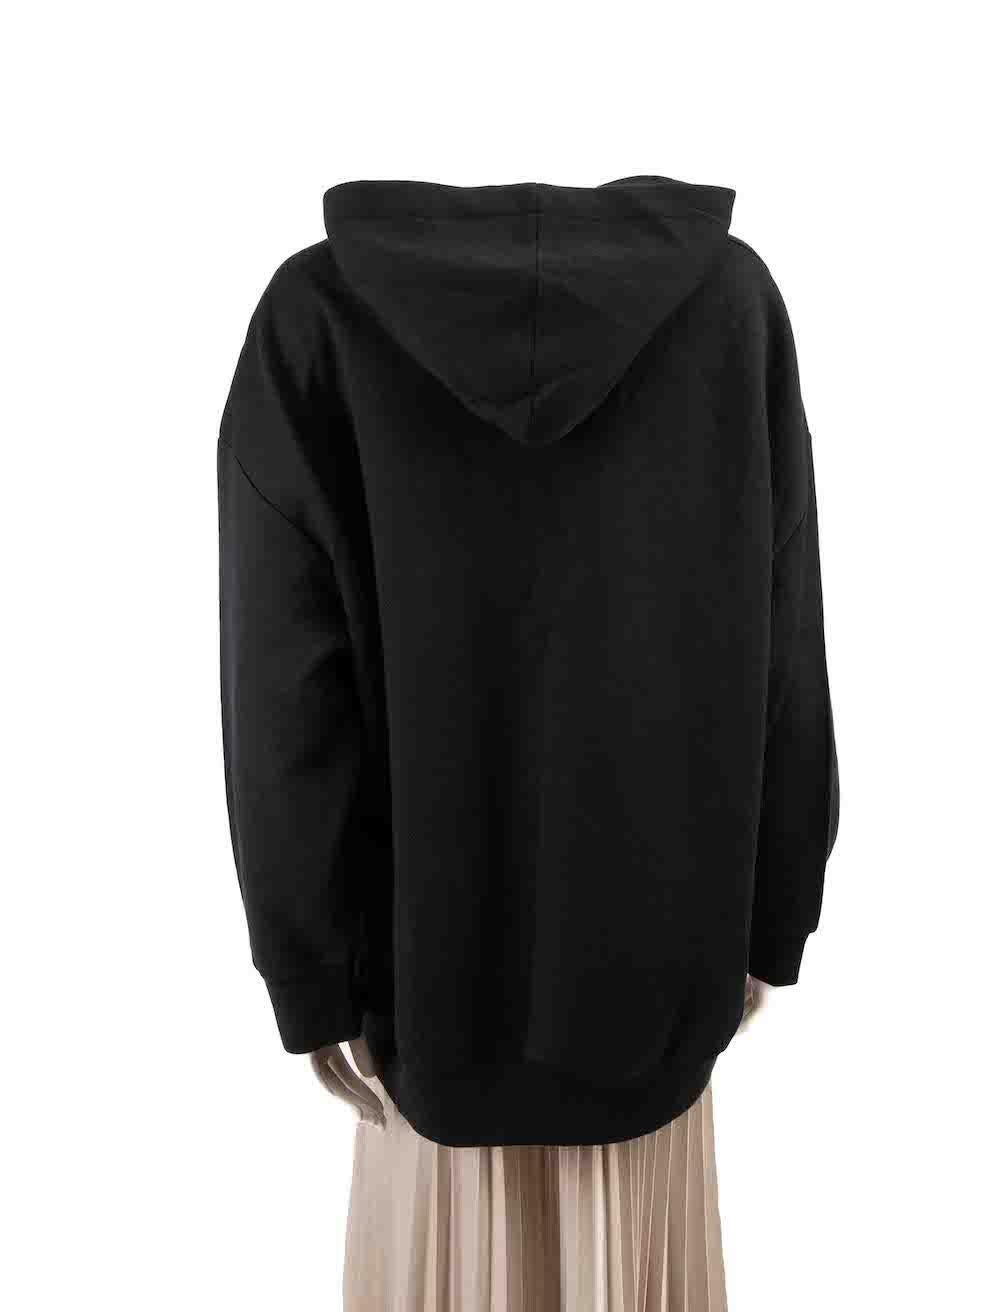 Stella McCartney Black Star Embellished Hoodie Size L In New Condition For Sale In London, GB